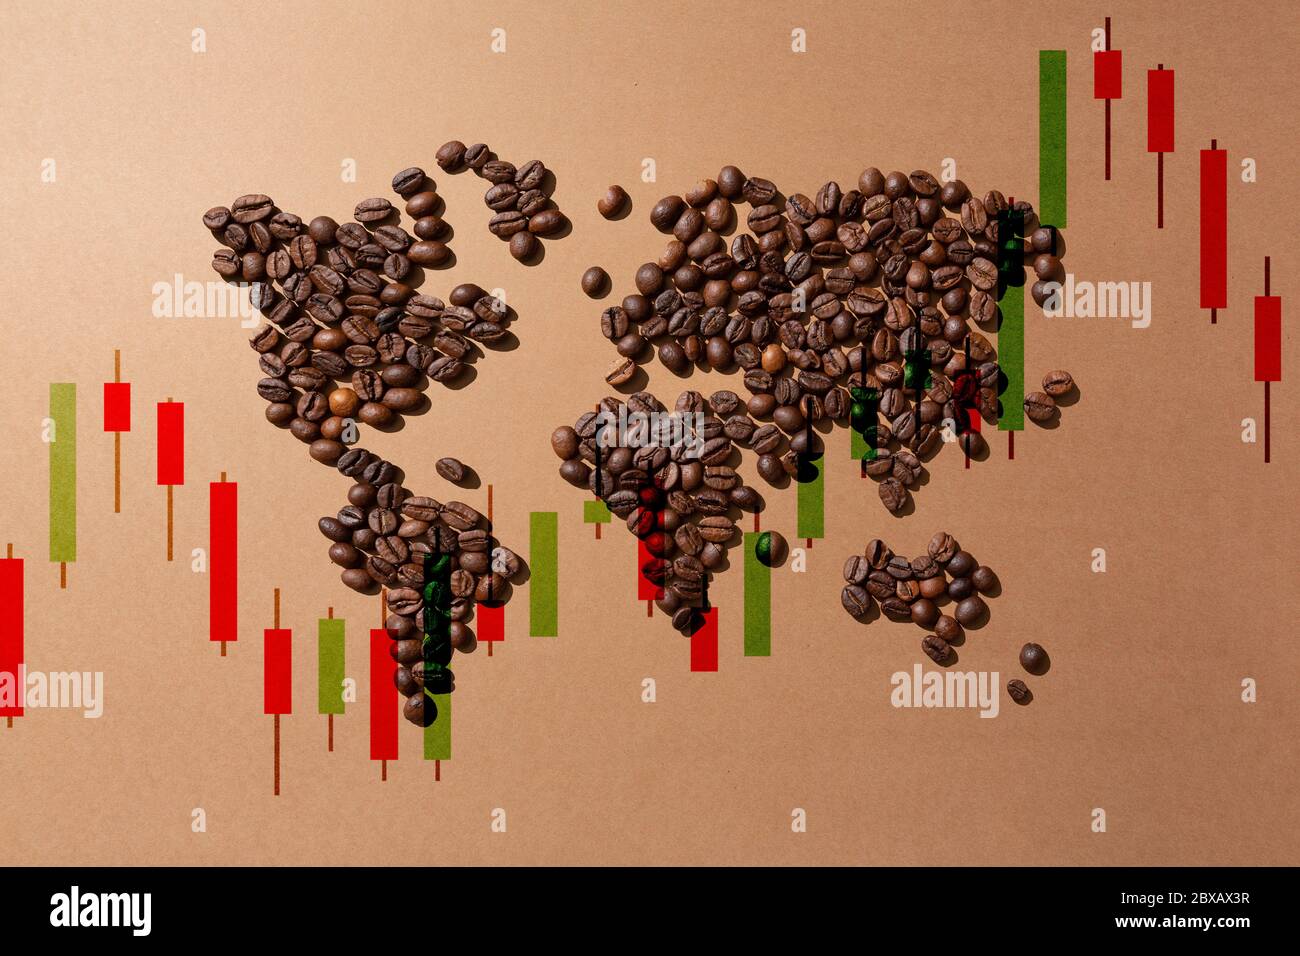 value of coffee in the markets worldwide.World map made with coffee beans on brown background Stock Photo